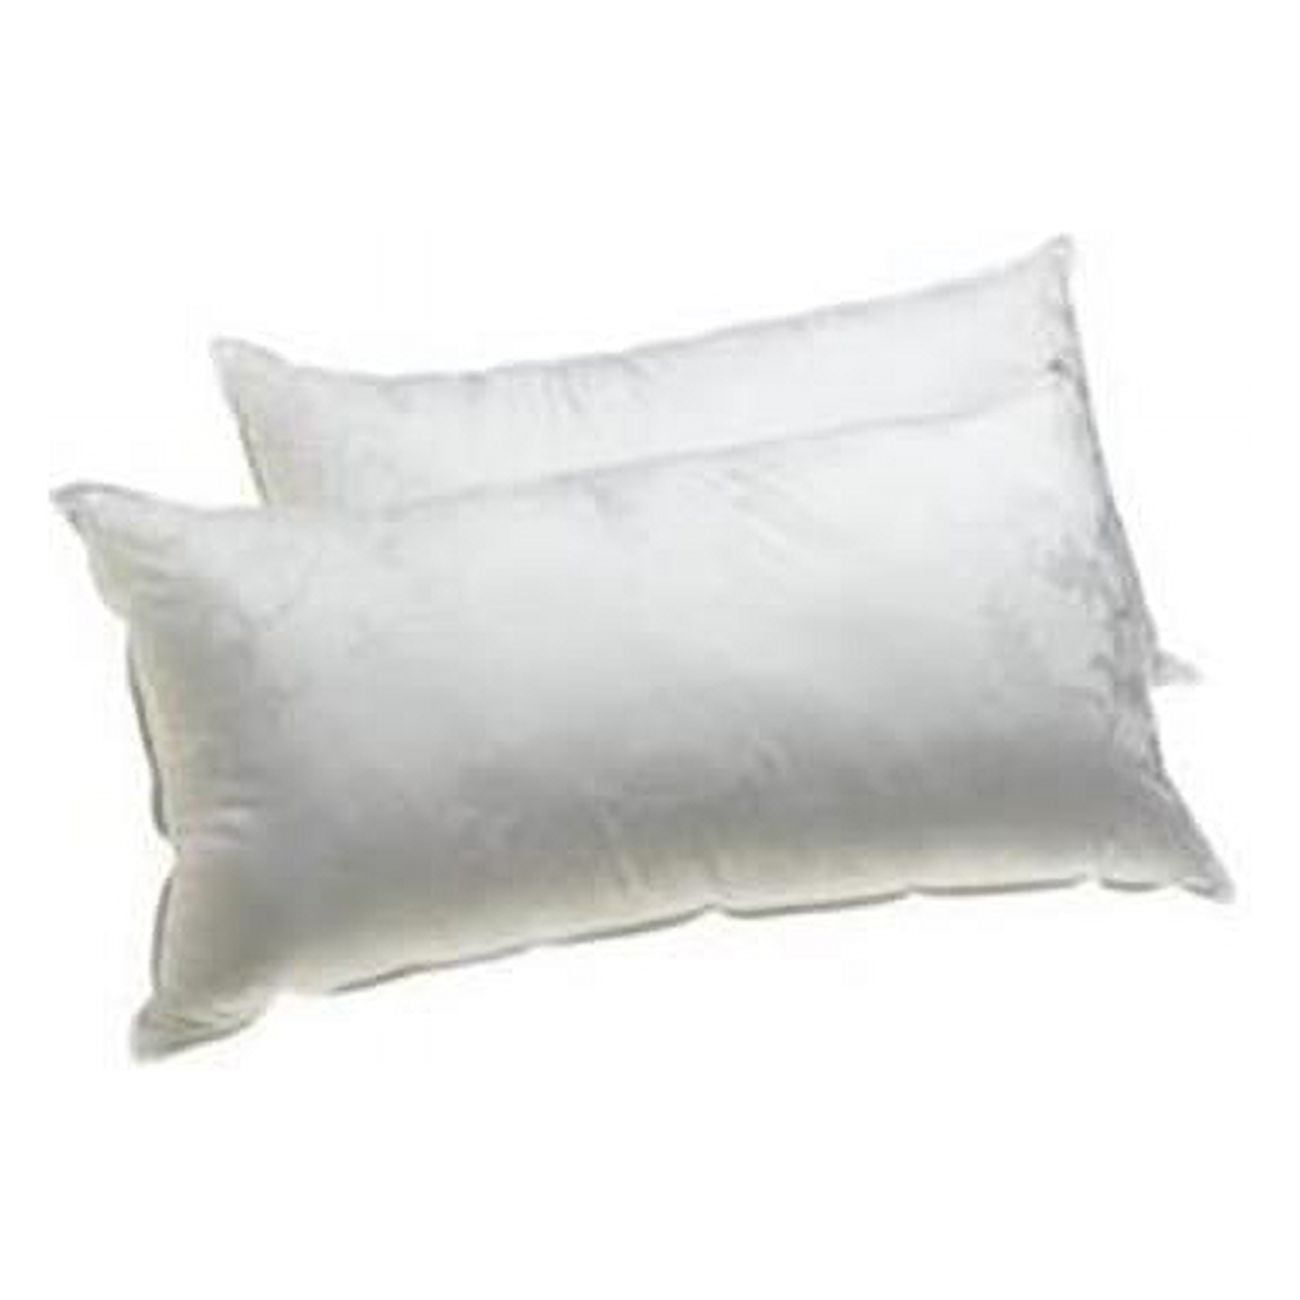 Beckham Hotel Collection Gel Pillow (2-Pack) - Luxury Plush Gel Pillow –  Pete's Home Decor & Furnishings